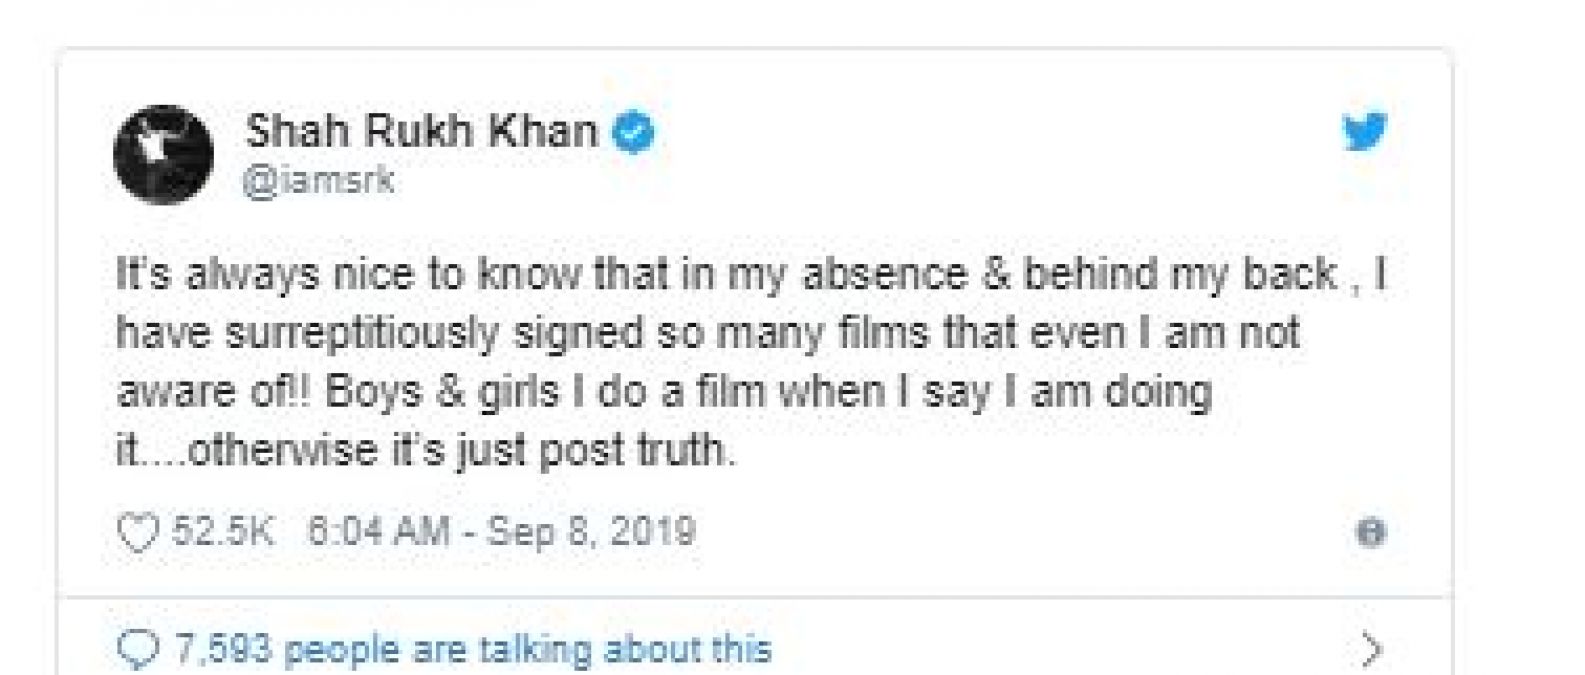 Shahrukh Khan nervous about rumors, said this in tweet